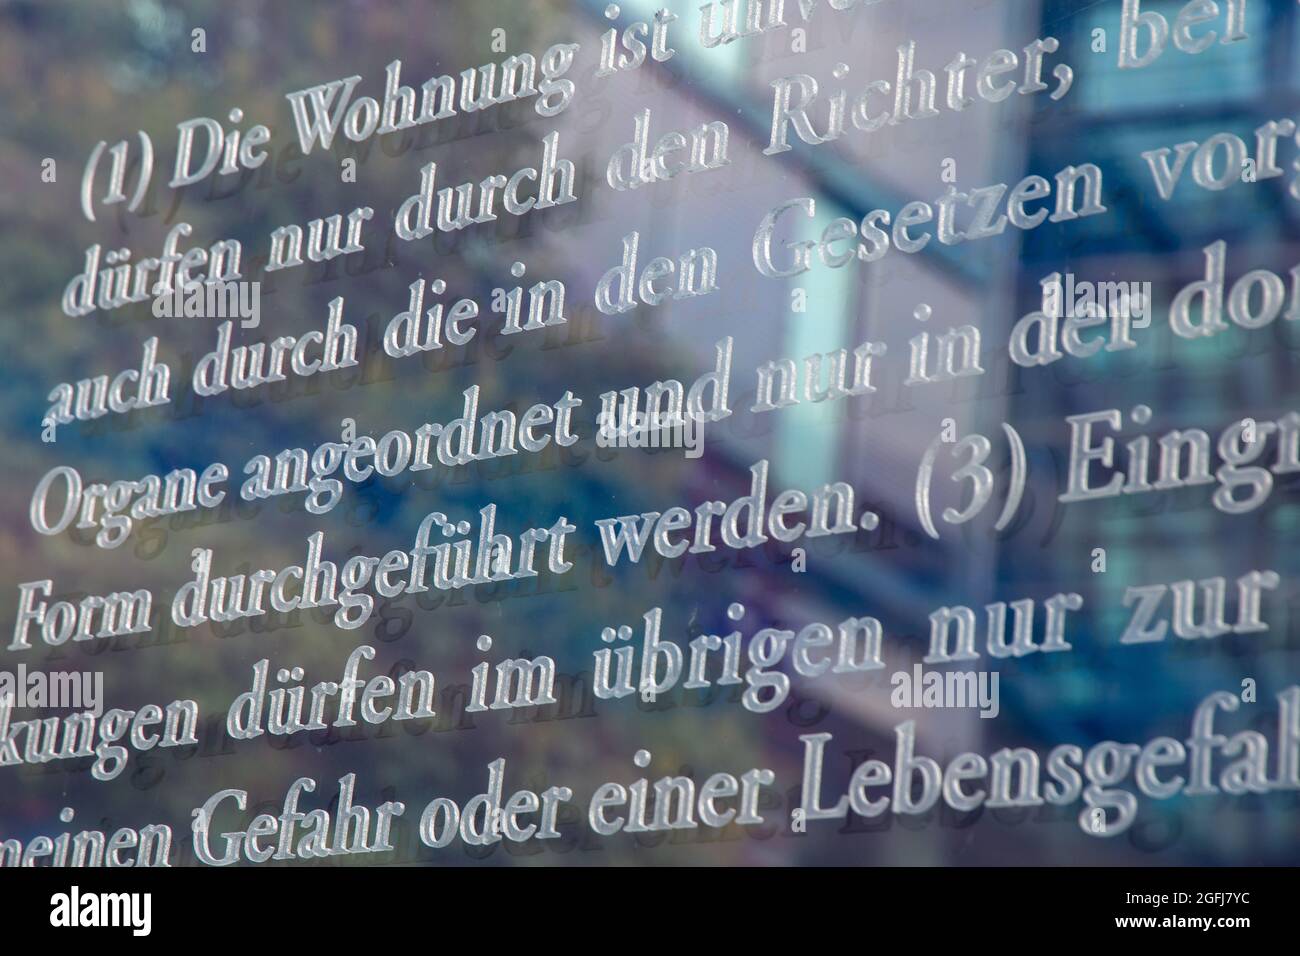 German Basic Law Article 13,Inviolability of the home (Unverletzlichkeit der Wohnung) , photographed on the glass panes at Jakob-Kaiser-Haus in Berlin Stock Photo